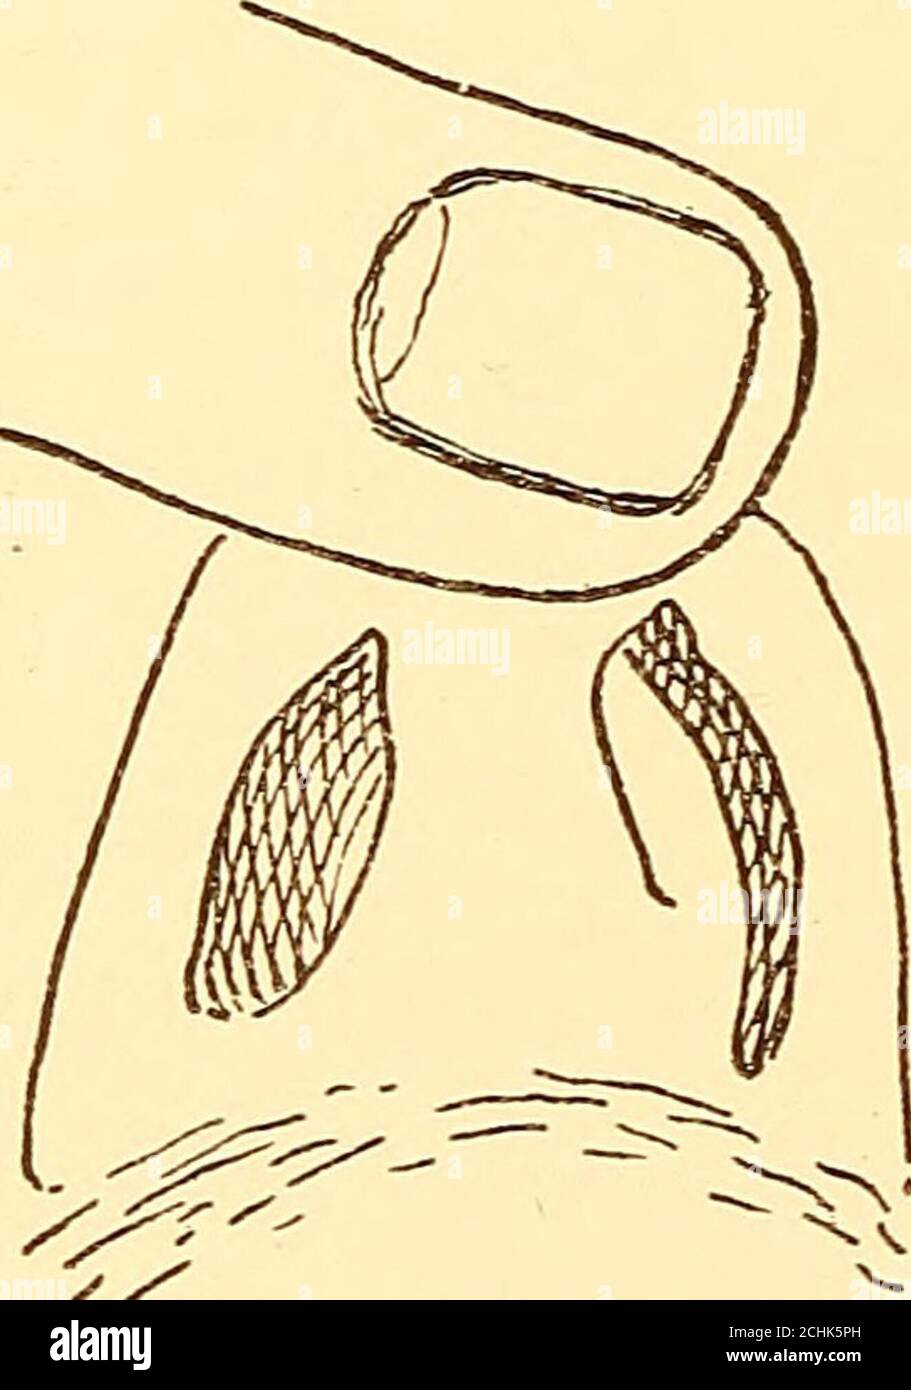 . Diseases of the nose and throat . correcting asymmetries, especially the turbinates oppositea concave septum, may be more noticeable to casual inspec-tion than the asymmetry of the septum itself. The nasal processes of the superior maxilla do nottake part in this adjustment, consequently a deviation ofthe septal cartilage which extends forward into the vestibuleobstructs respiration on that side more than would an equaldegree of deviation farther back. When the deviation ex-tends forward into the vestibule the patient may noticethat on one side it is only by drawing the alae and skin 78 DISE Stock Photo